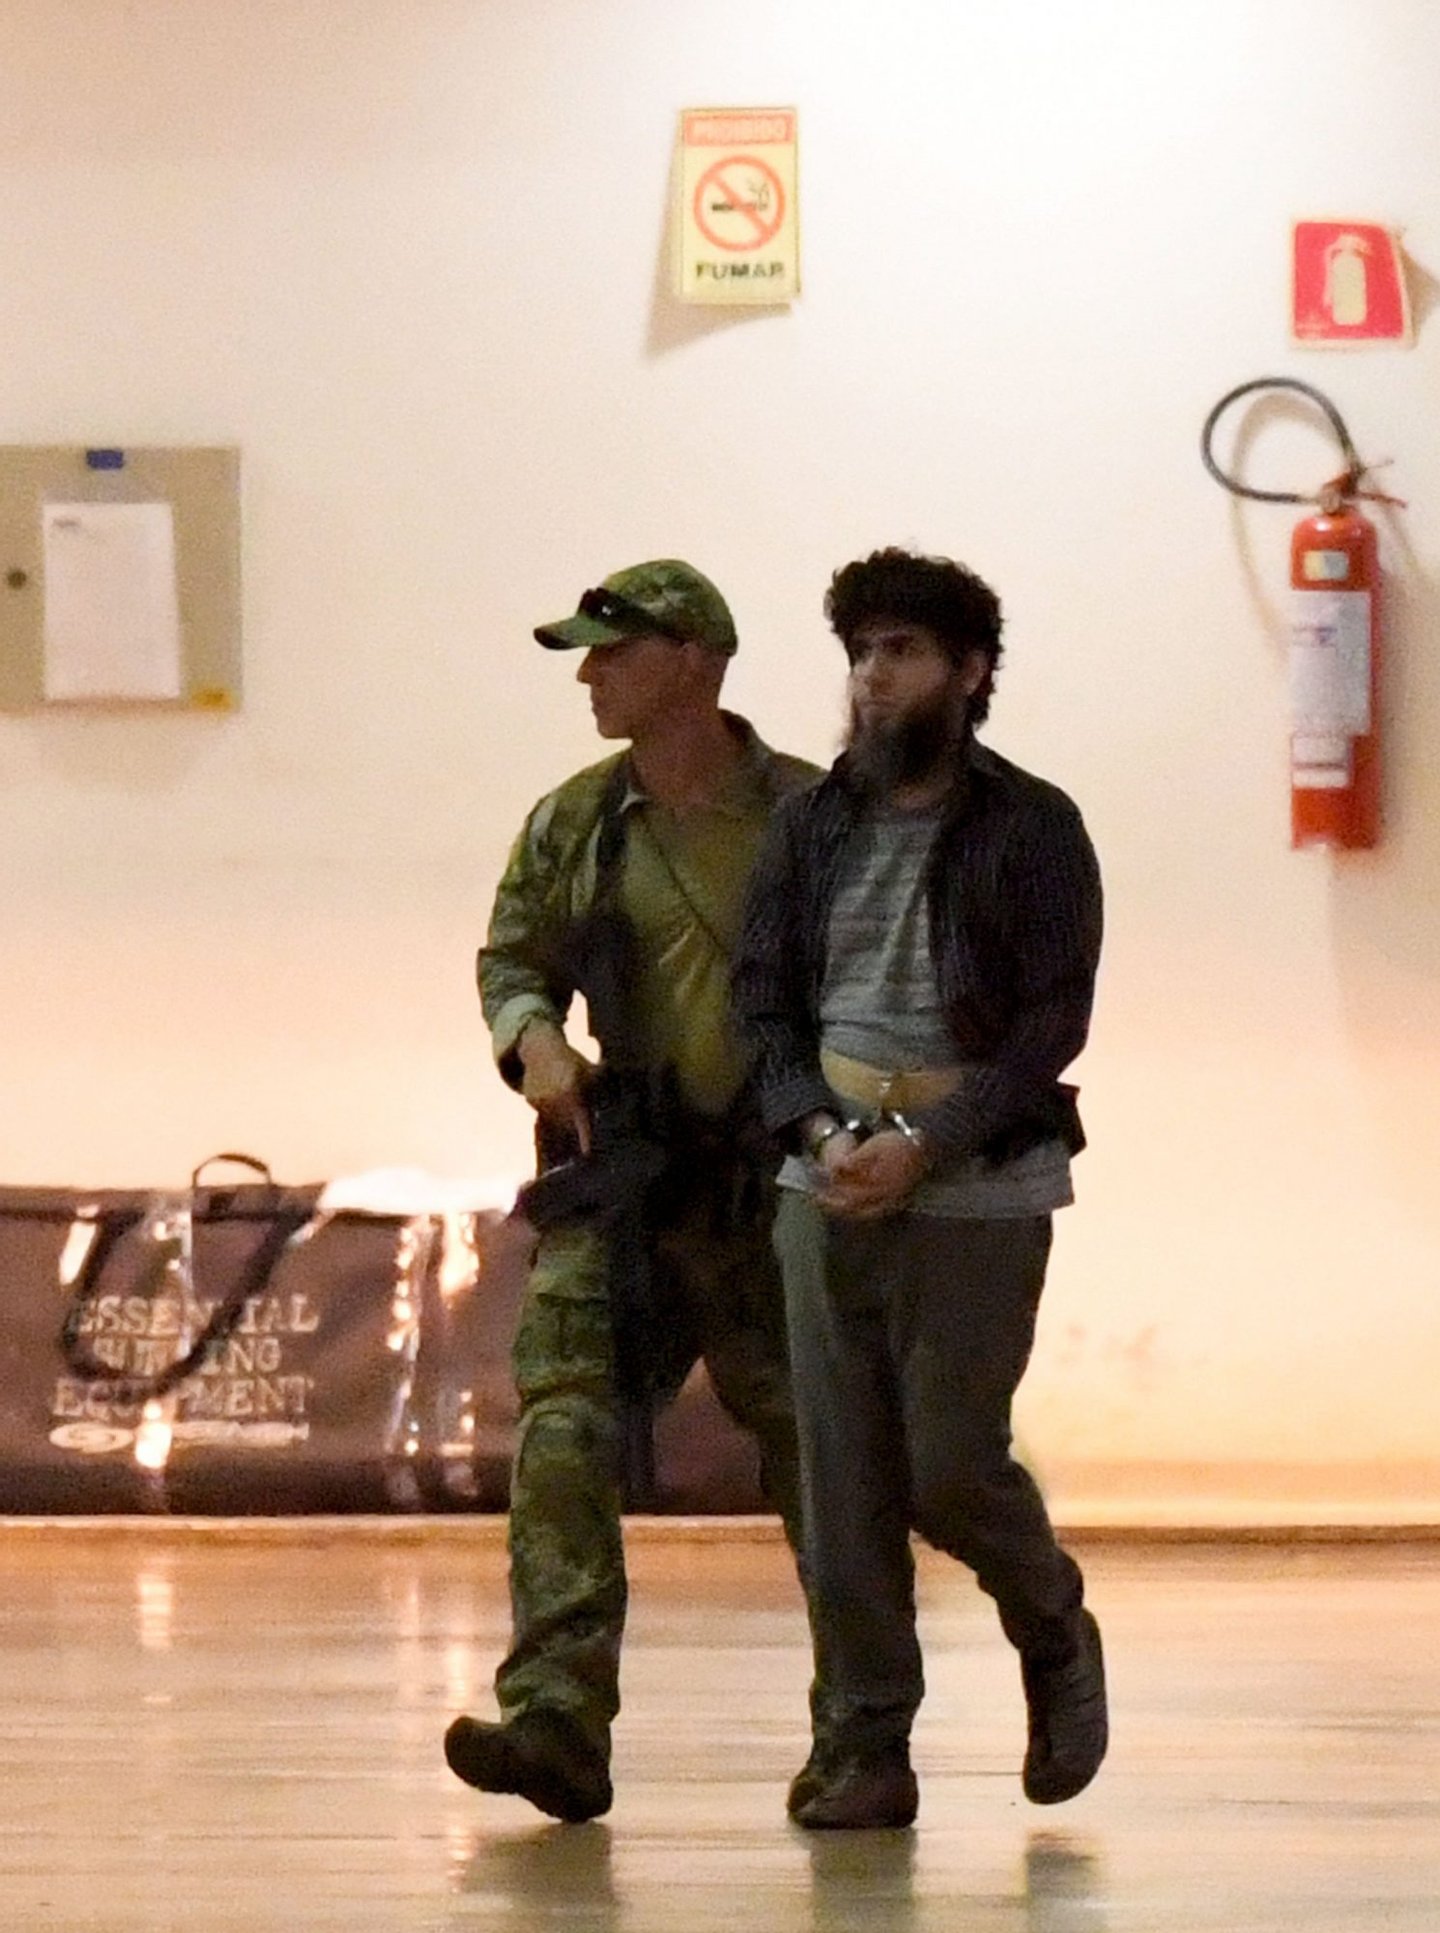 An alleged terrorist walks escorted by police at the Brazilian Federal Police hangar at the airport in Brasilia on July 21, 2016. Brazilian police have arrested 10 members of an "amateur" would-be terrorist group that expressed loyalty to the Islamic State organization and was targeting the upcoming Olympics, officials said. / AFP / EVARISTO SA (Photo credit should read EVARISTO SA/AFP/Getty Images)